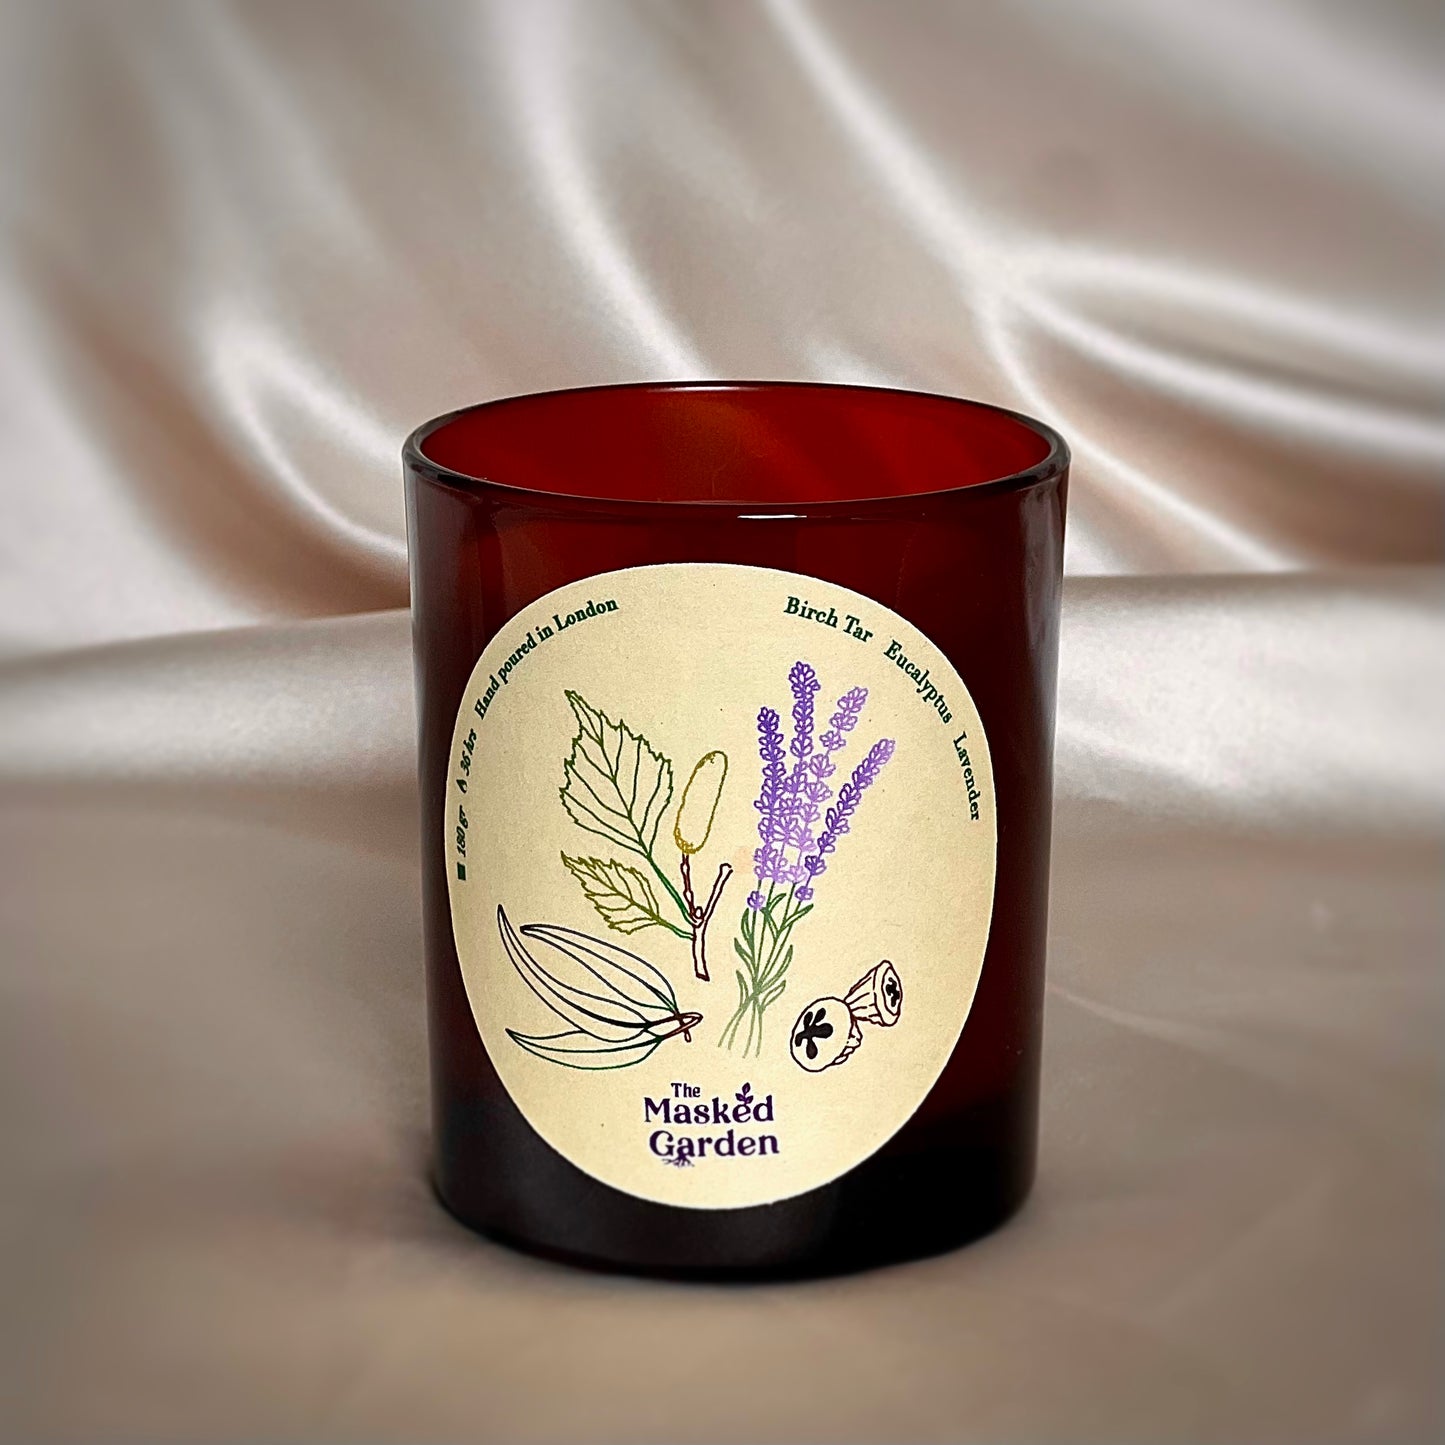 Birch Tar Candle | Soy Wax Candle with essential oils